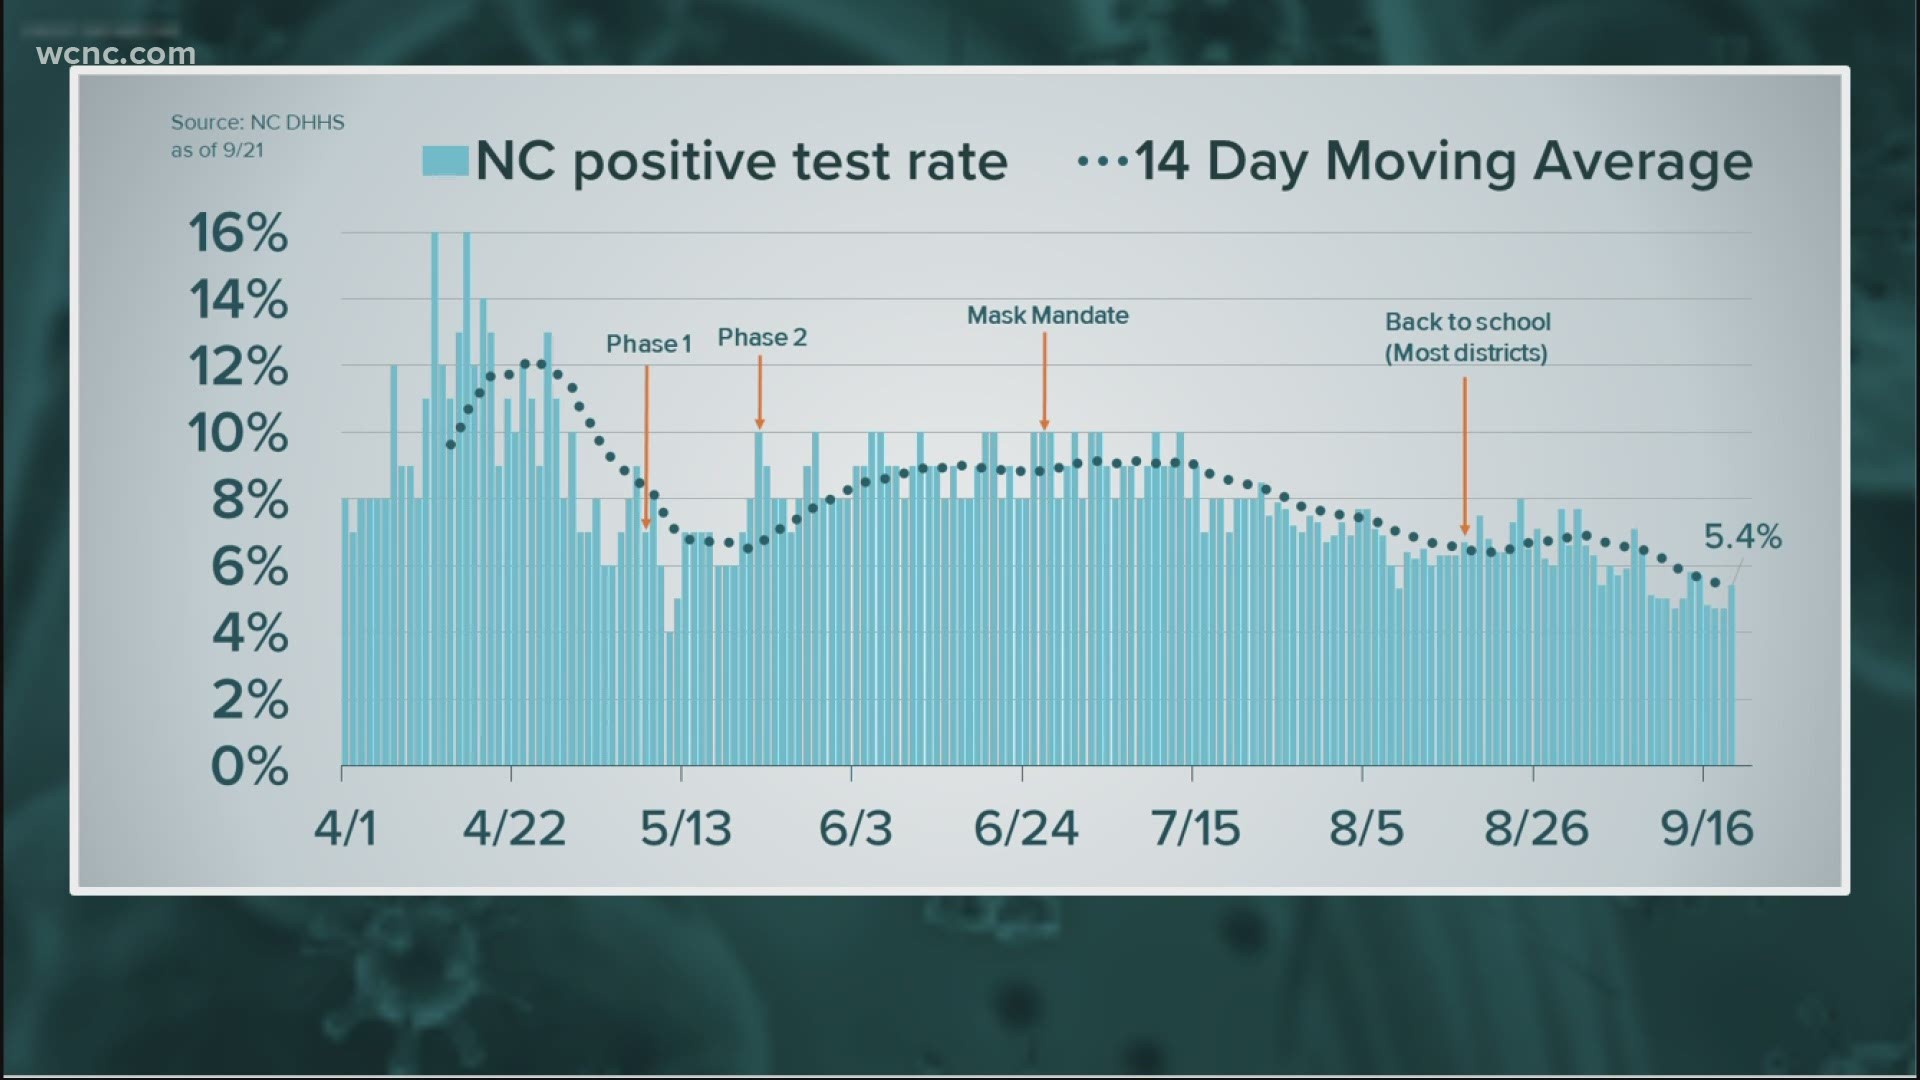 There are fewer new cases in both North and South Carolina and the percent positive cases in both states are also dropping.